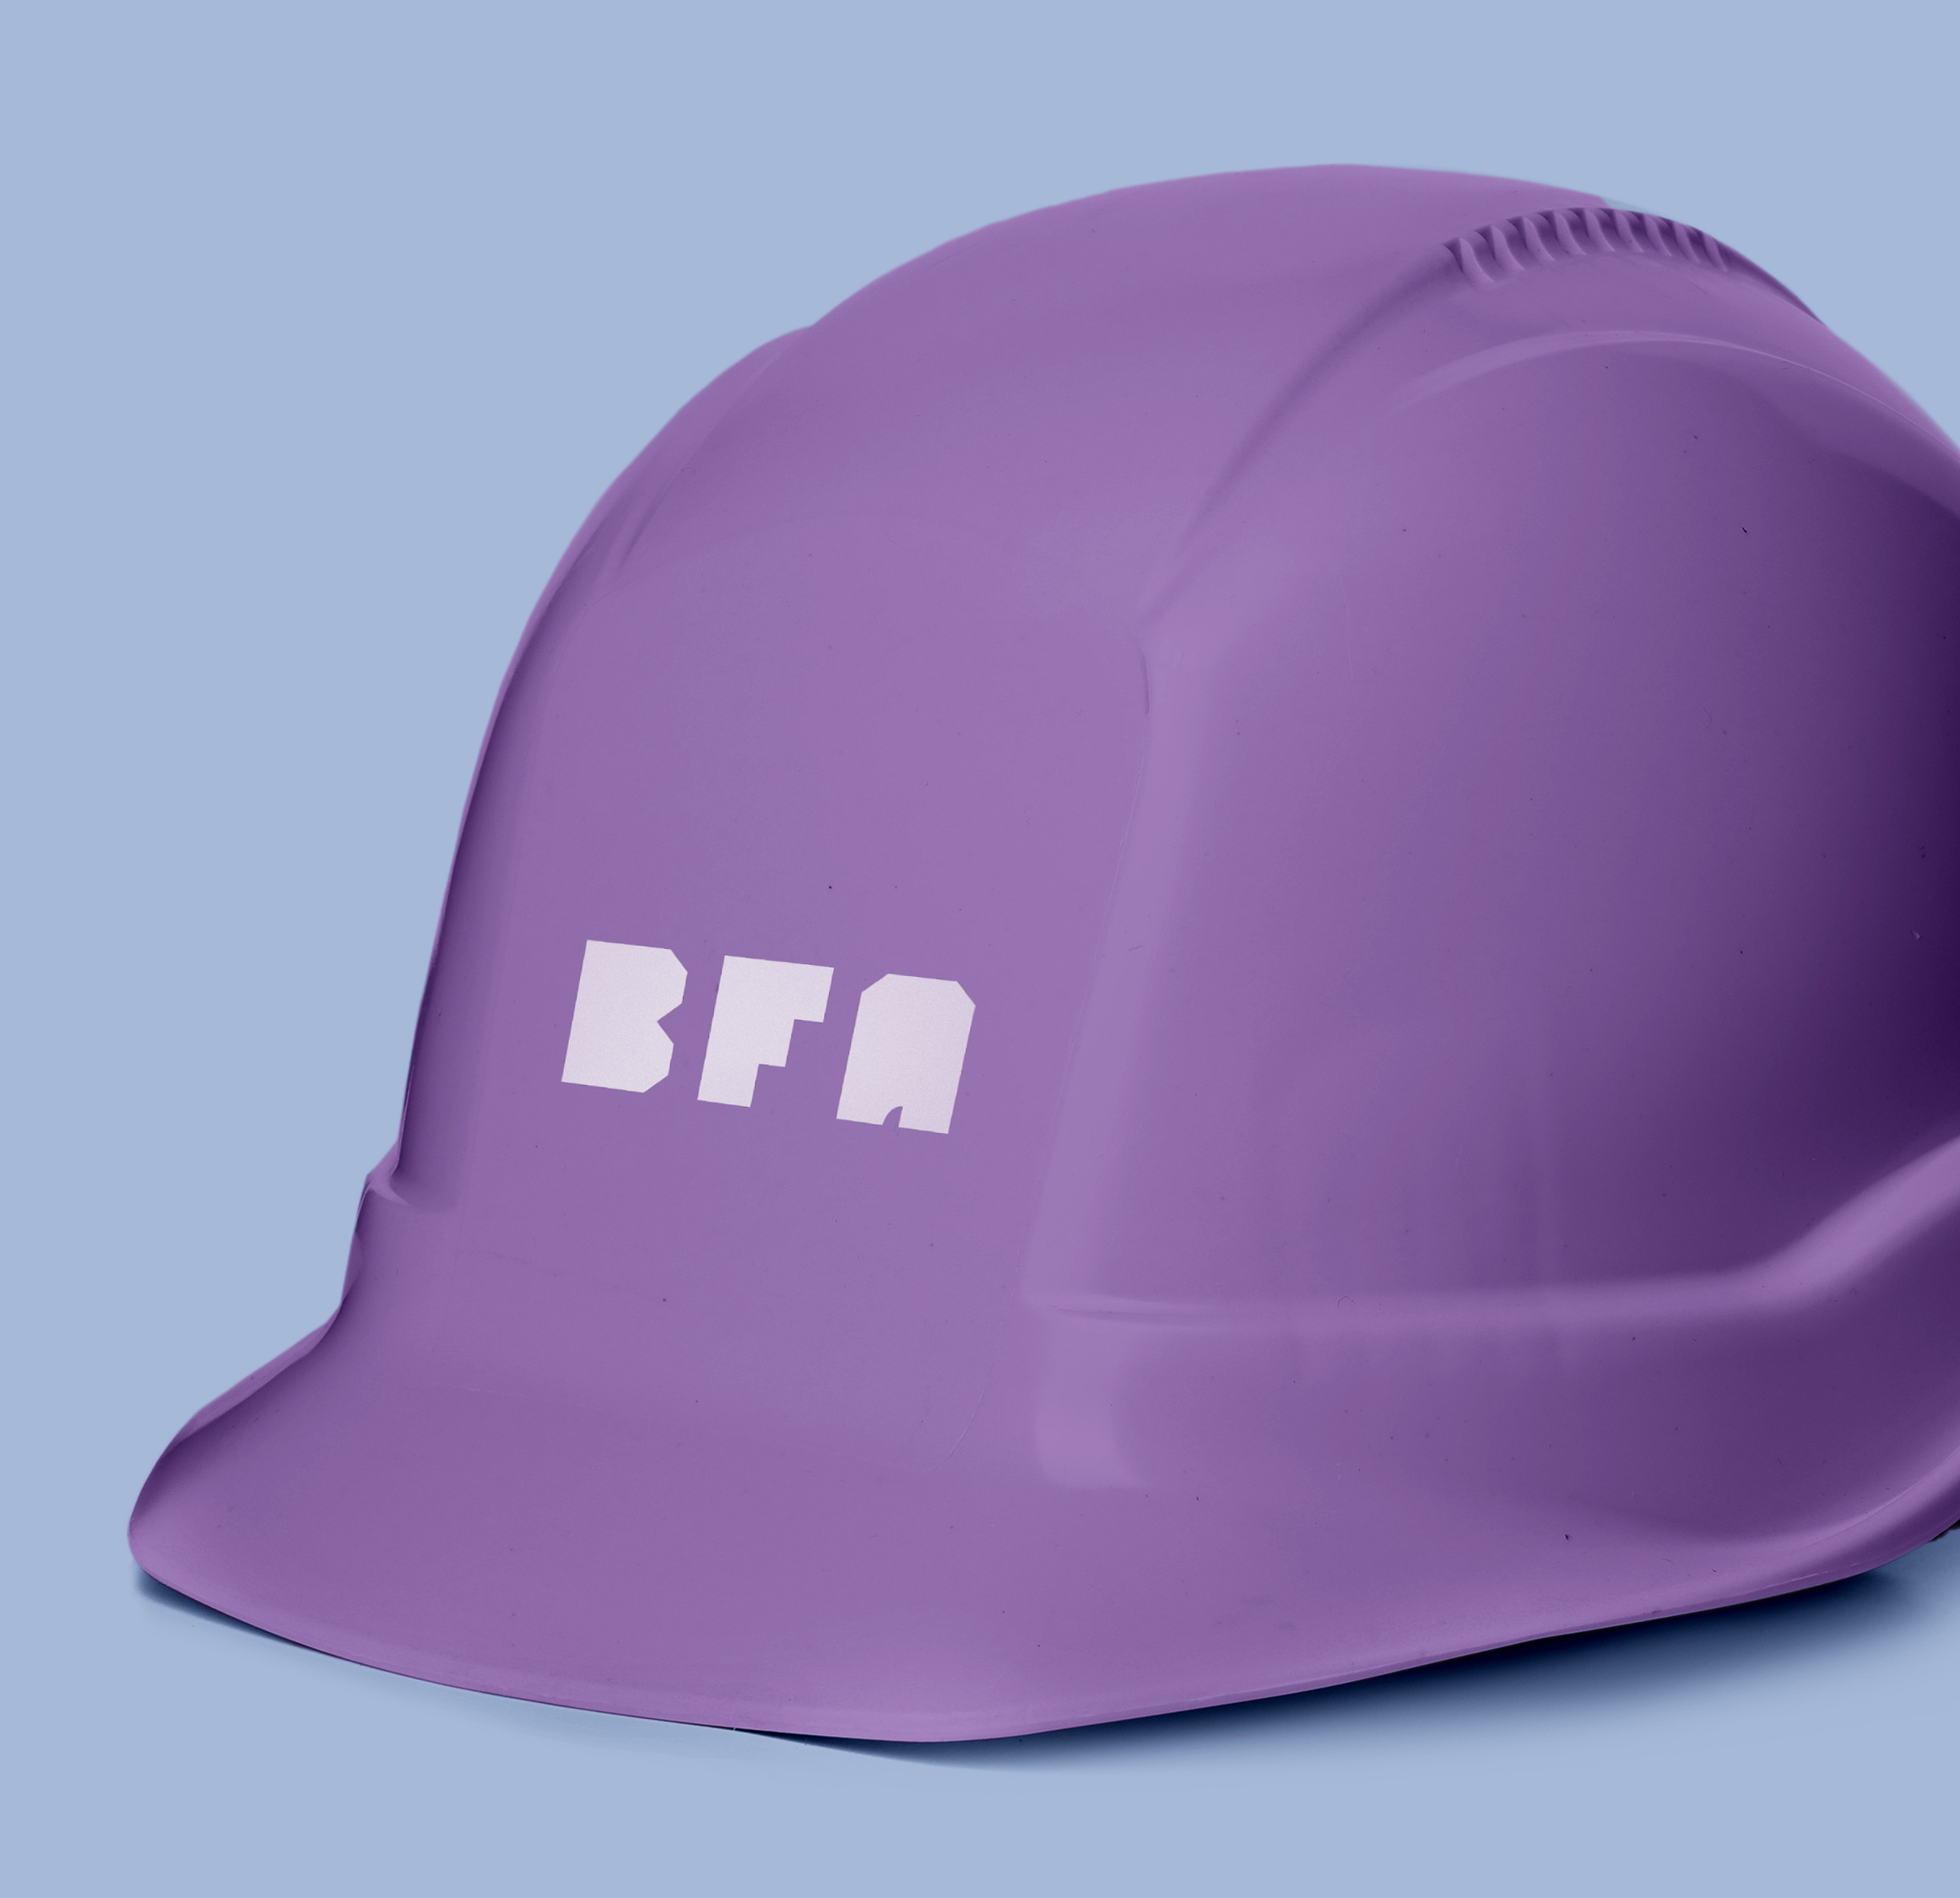 Set with construction safety hardhat on white background. Banner